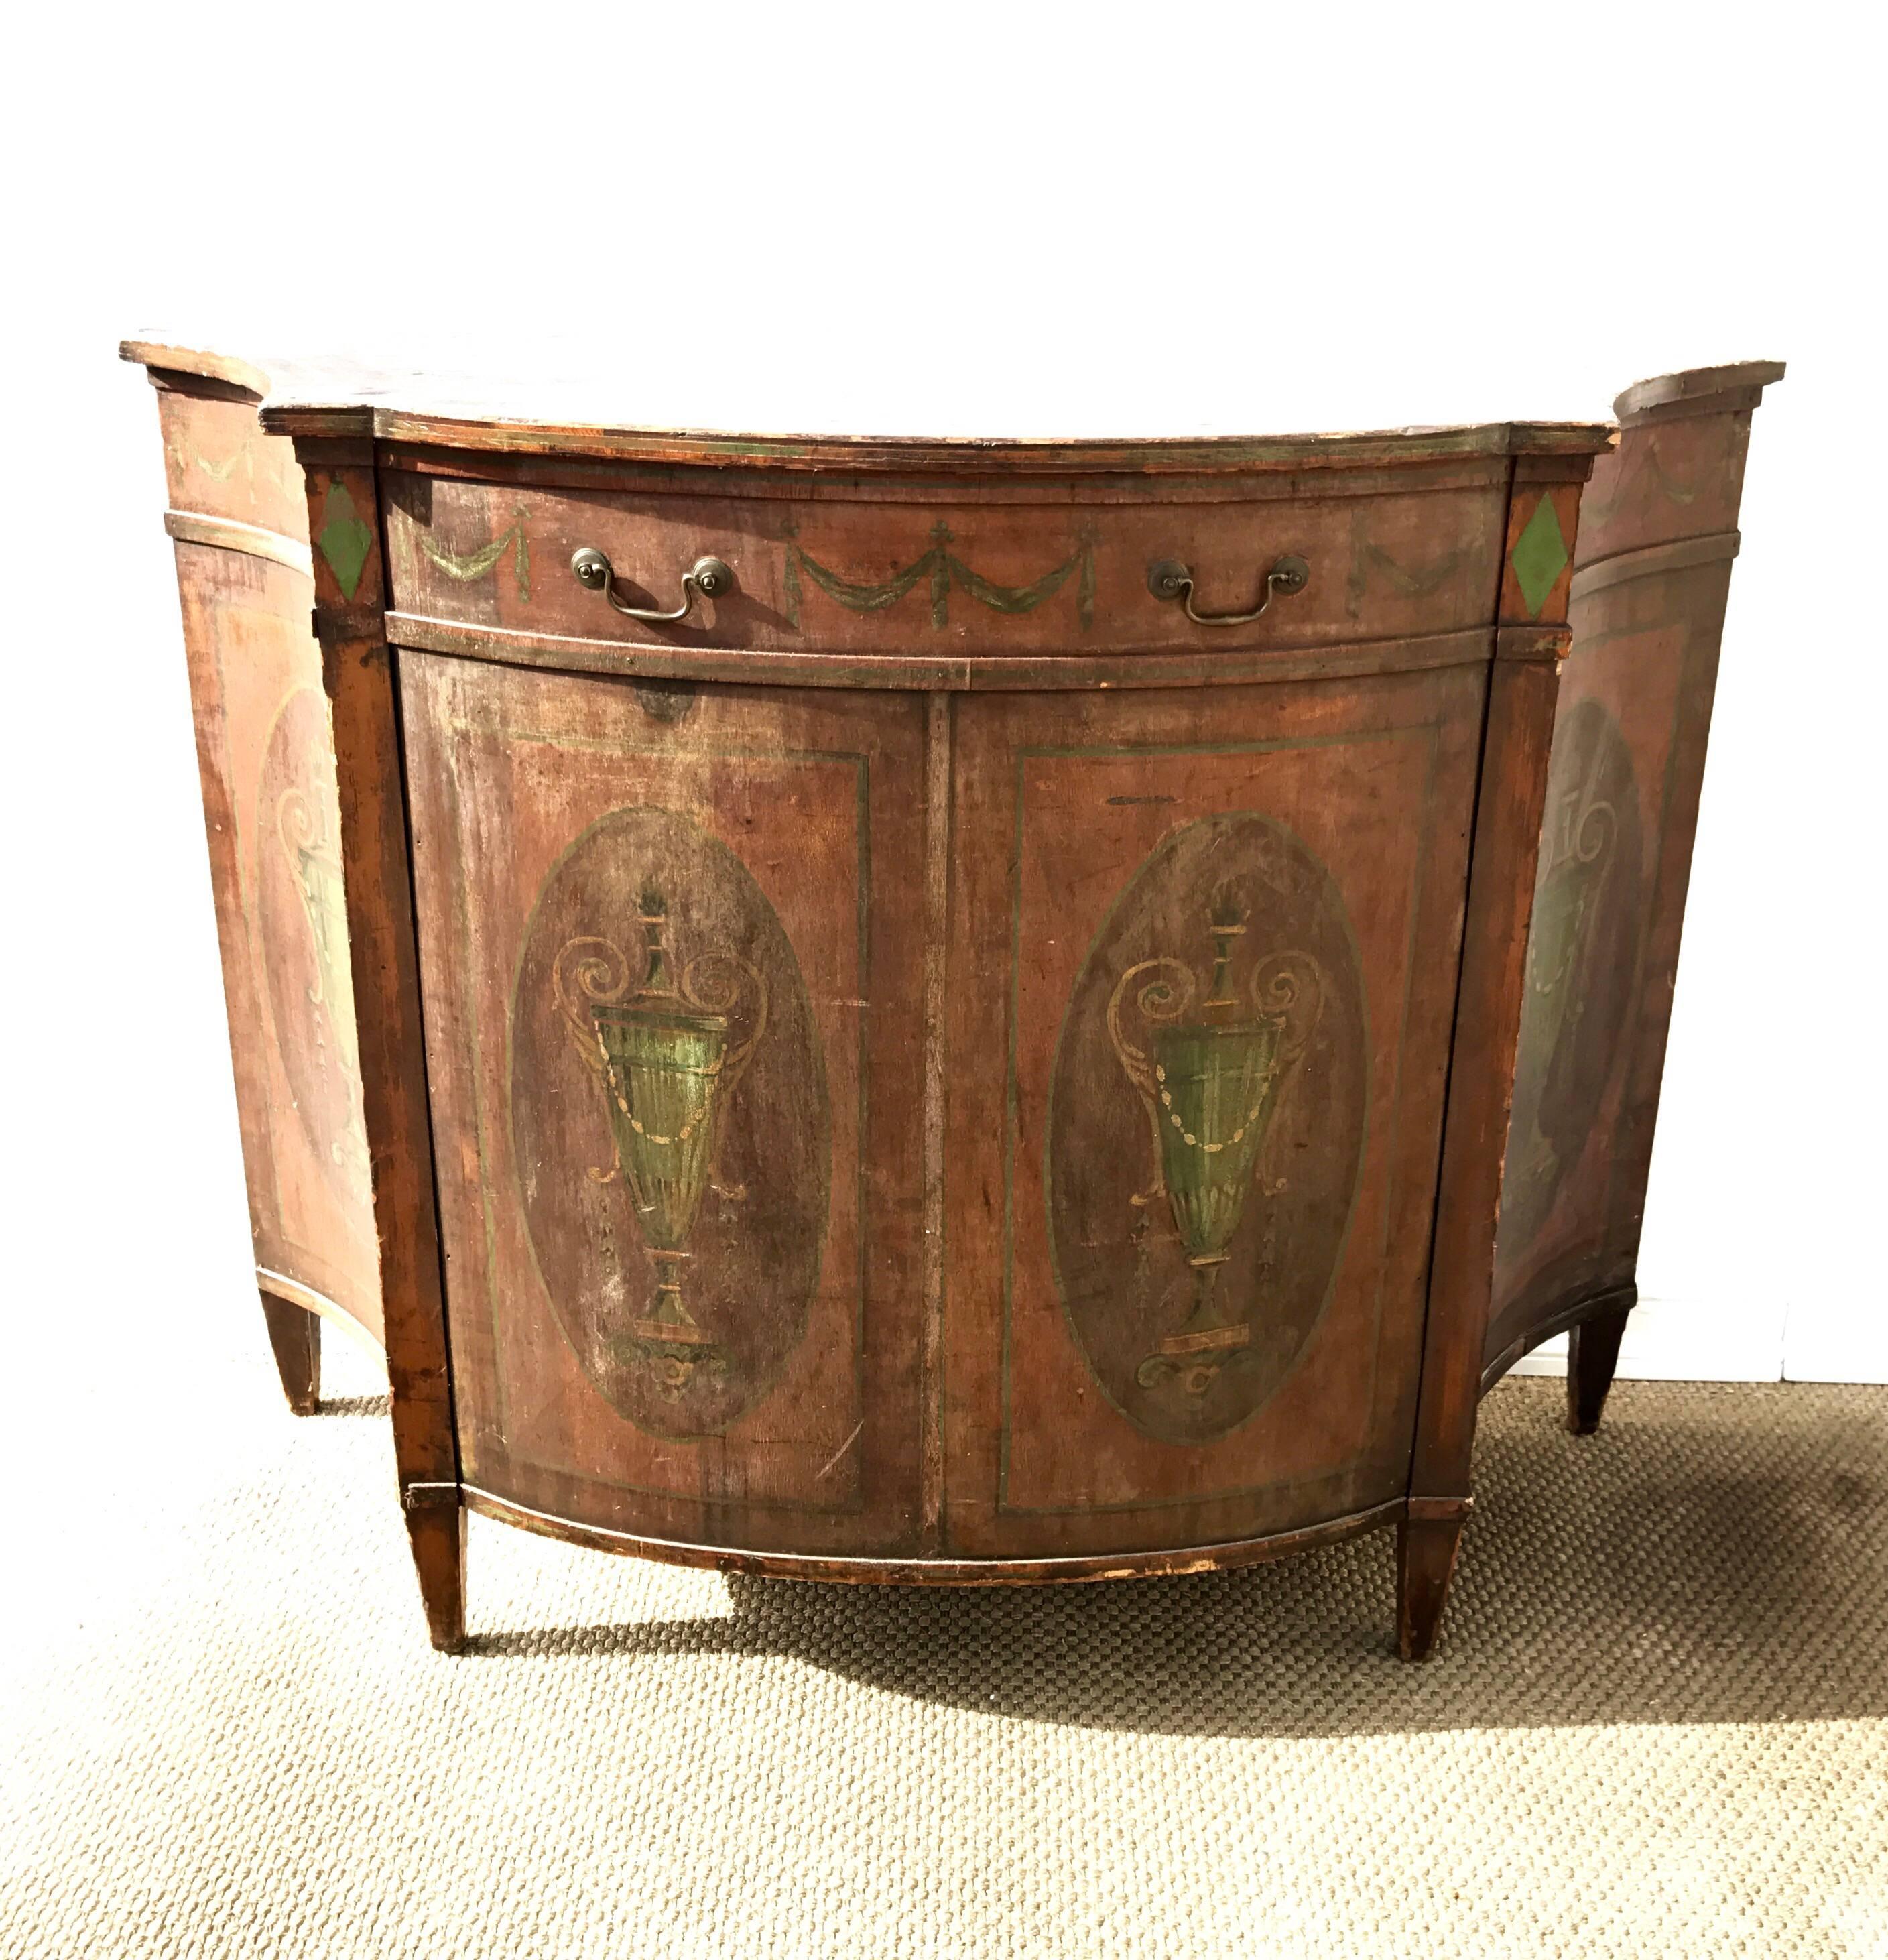 Unusual prop house made cabinet or vanity in the Adams taste. The hand painted and whimsical 